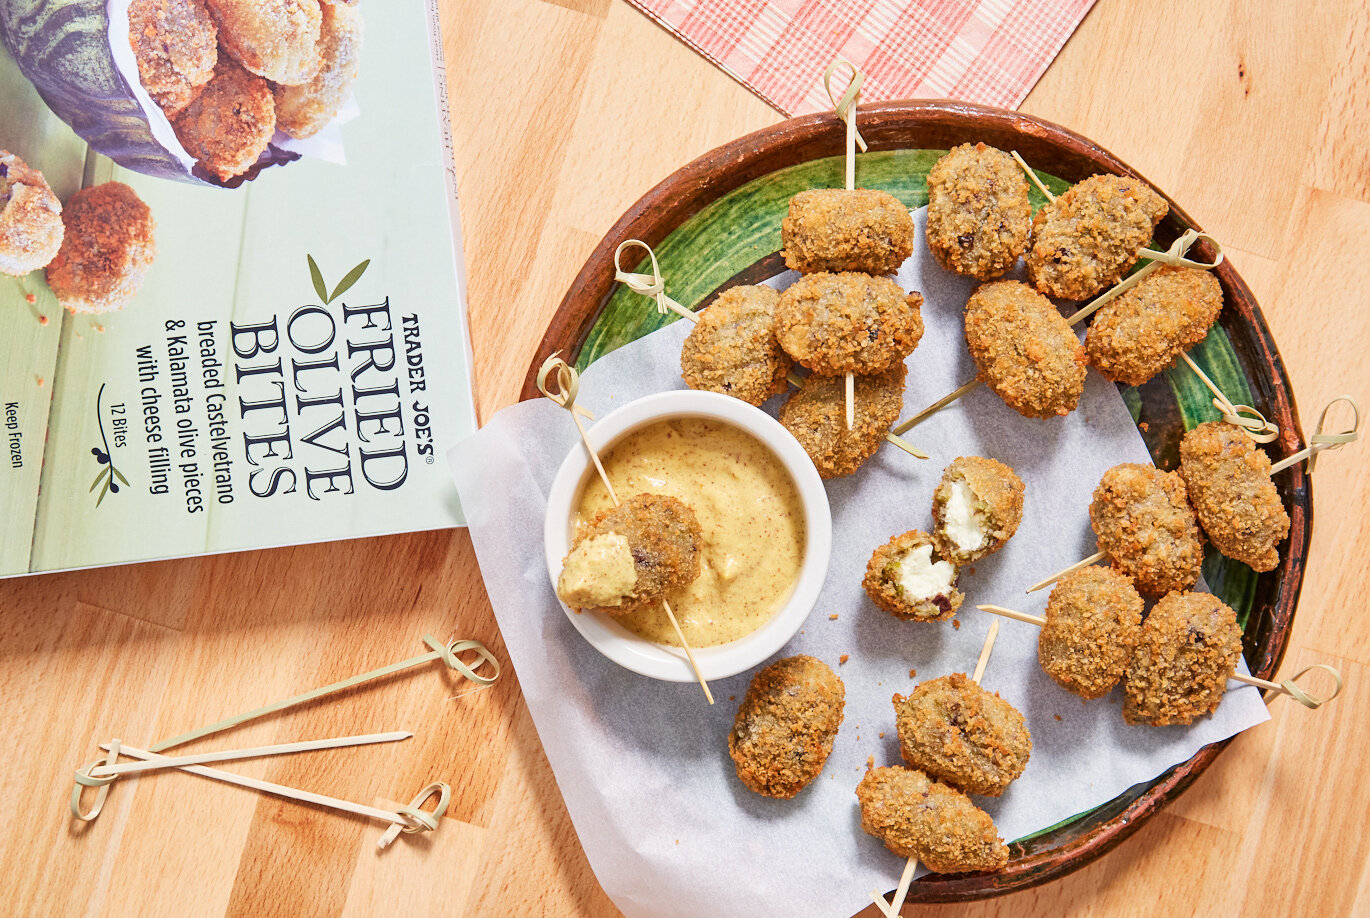 Trader Joe's Fried Olive Bites prepared and served on a plate, with aioli dipping sauce